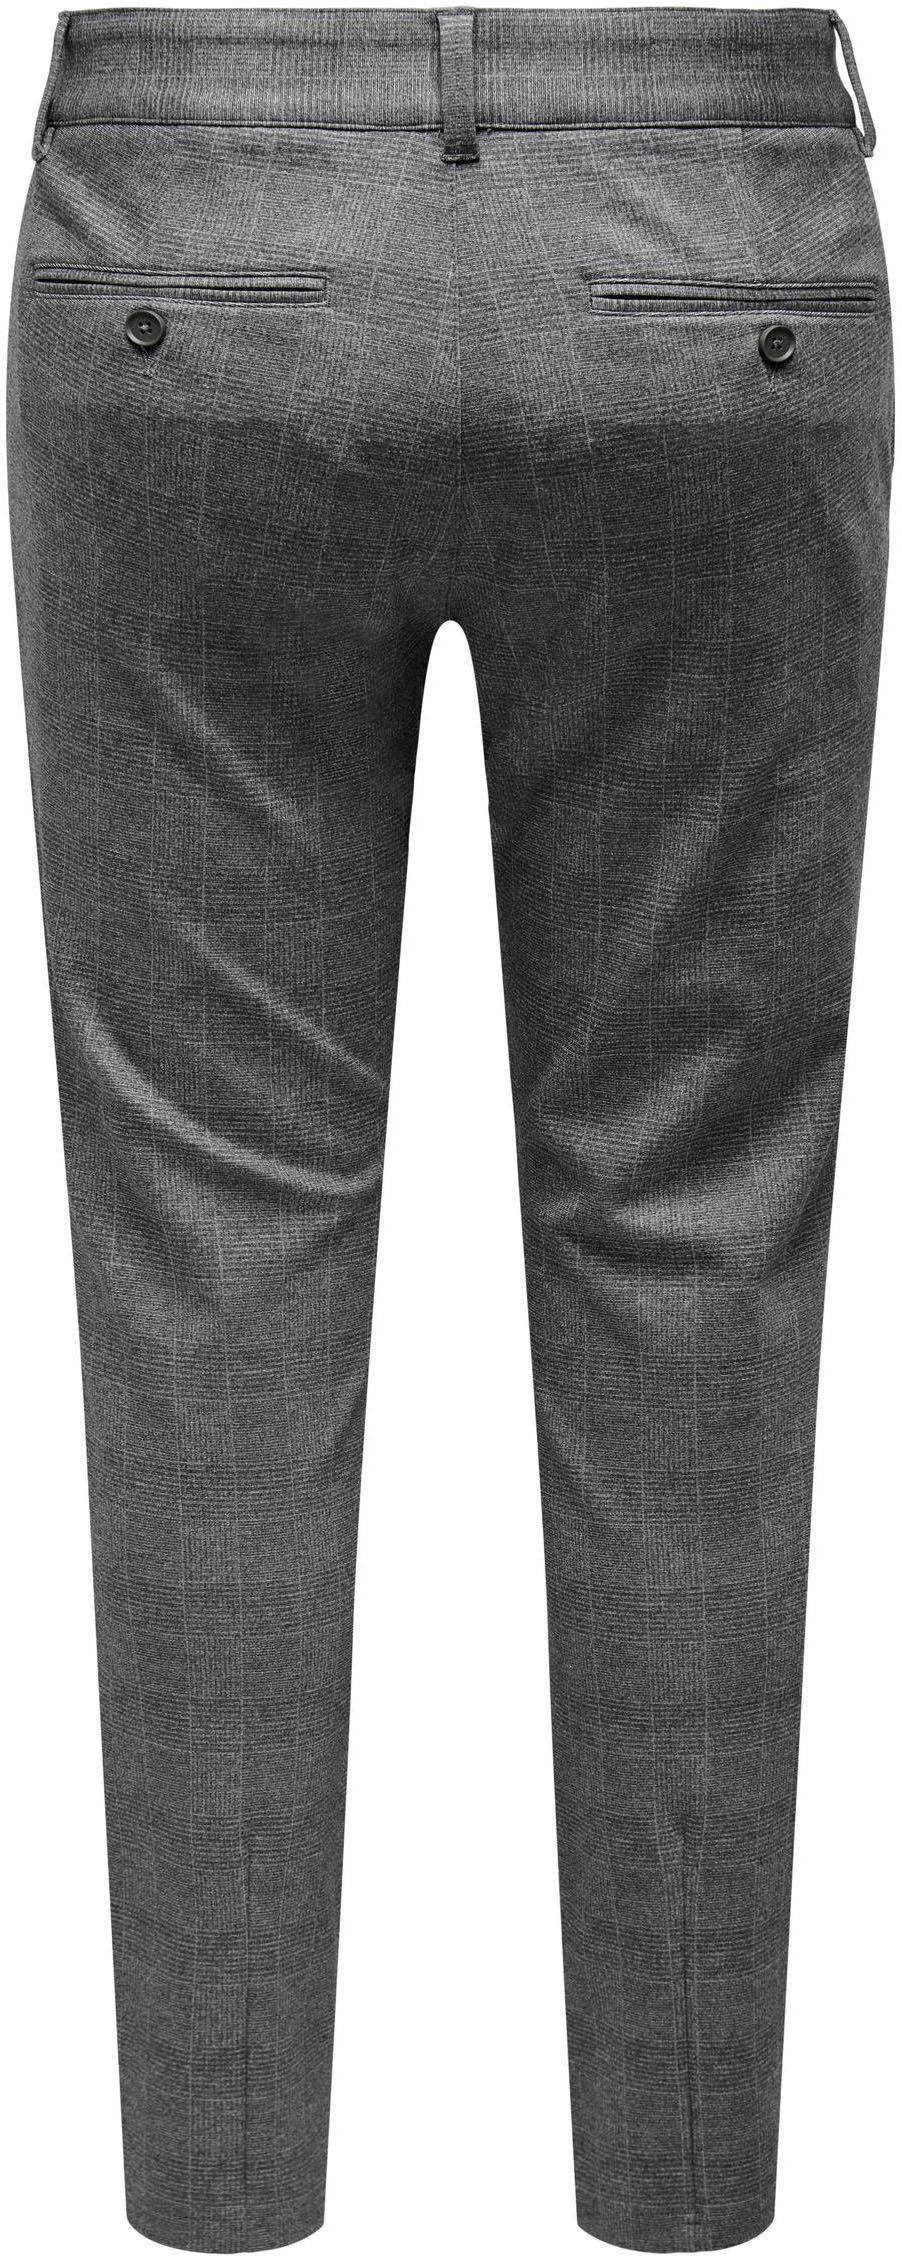 limestone & CHECK MARK PANTS SONS ONLY Chinohose